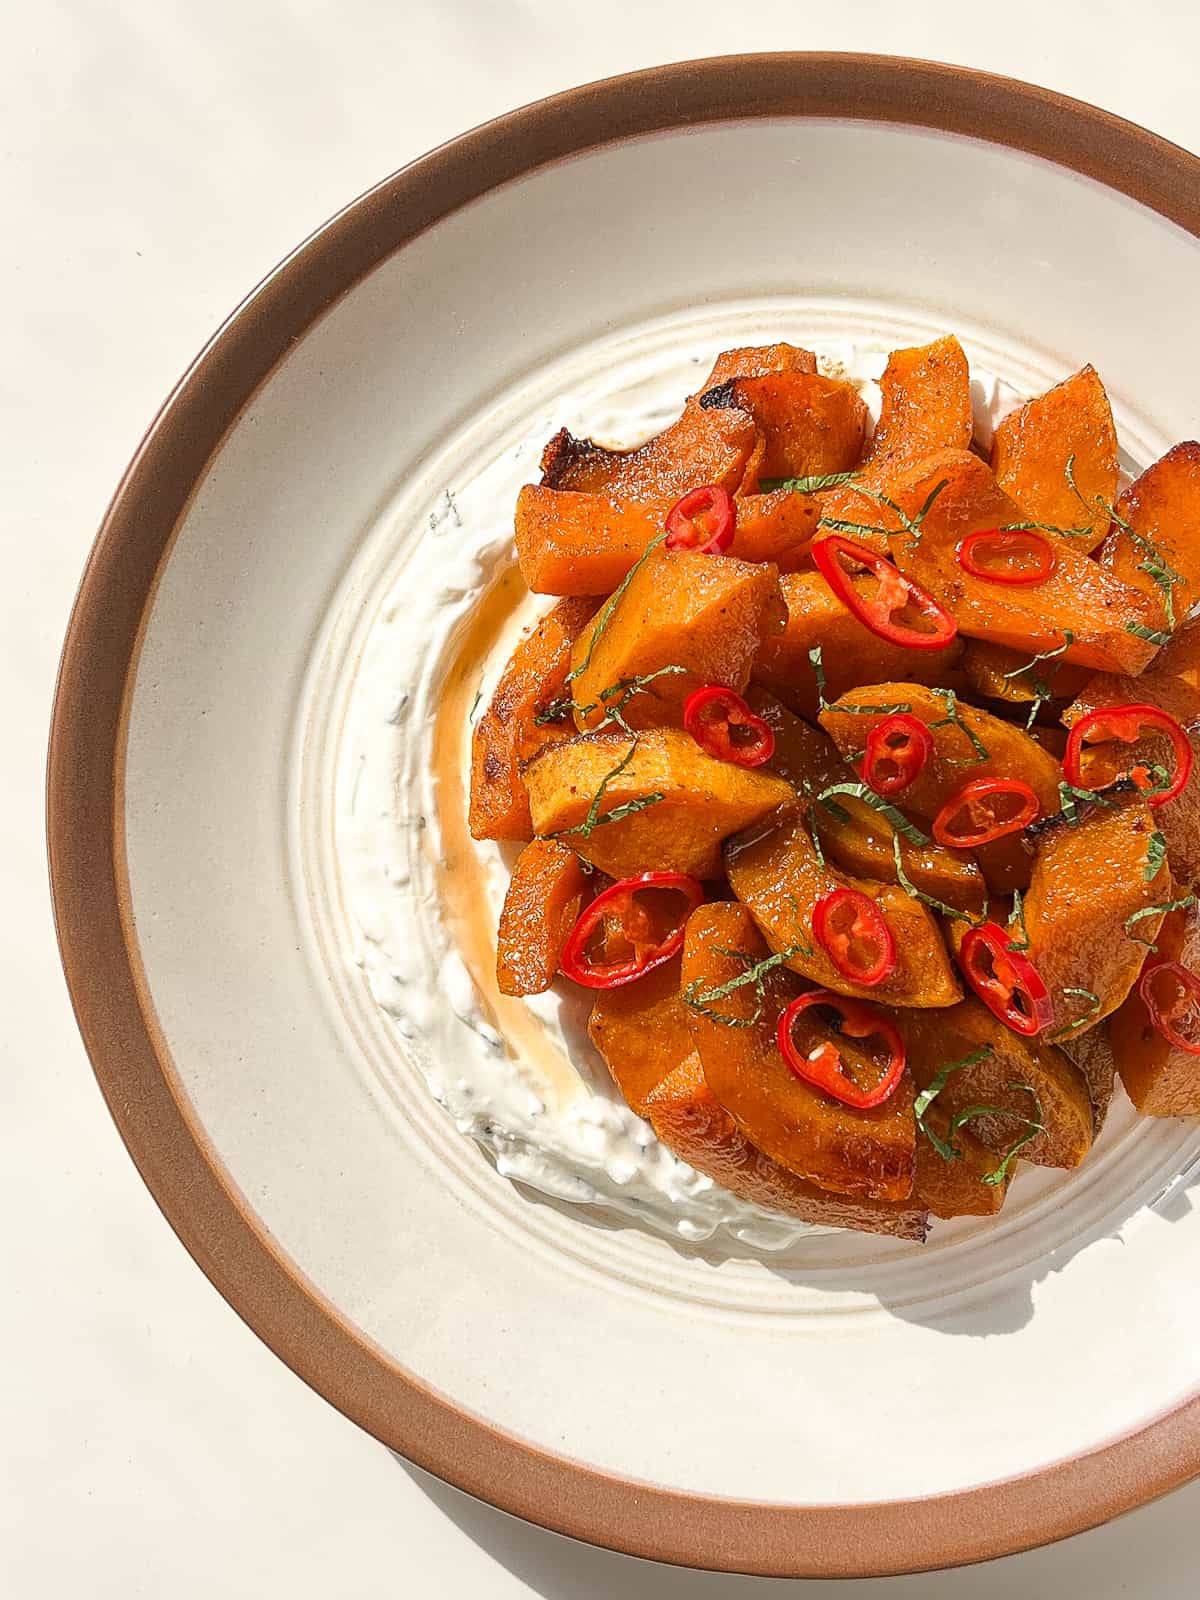 An image of roasted squash topped with pickled chillies.